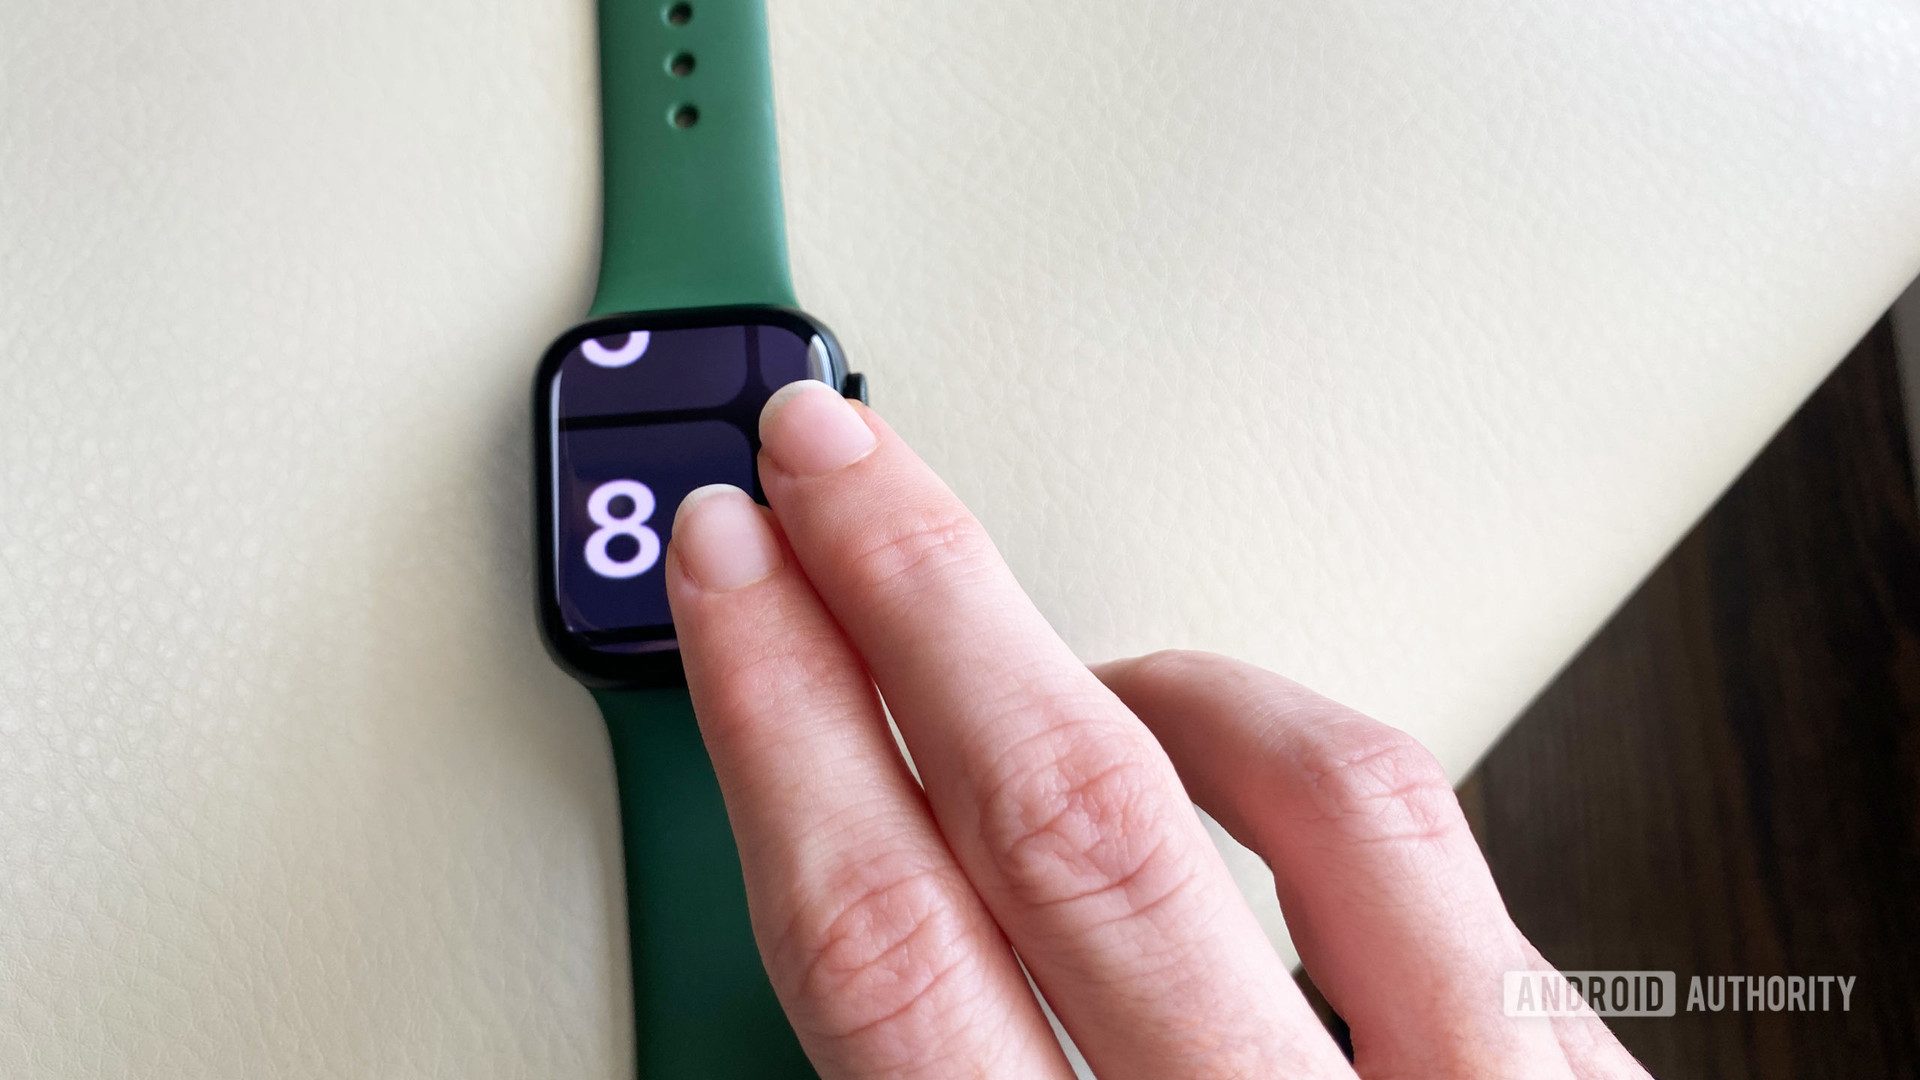 How to Zoom Out on Apple Watch